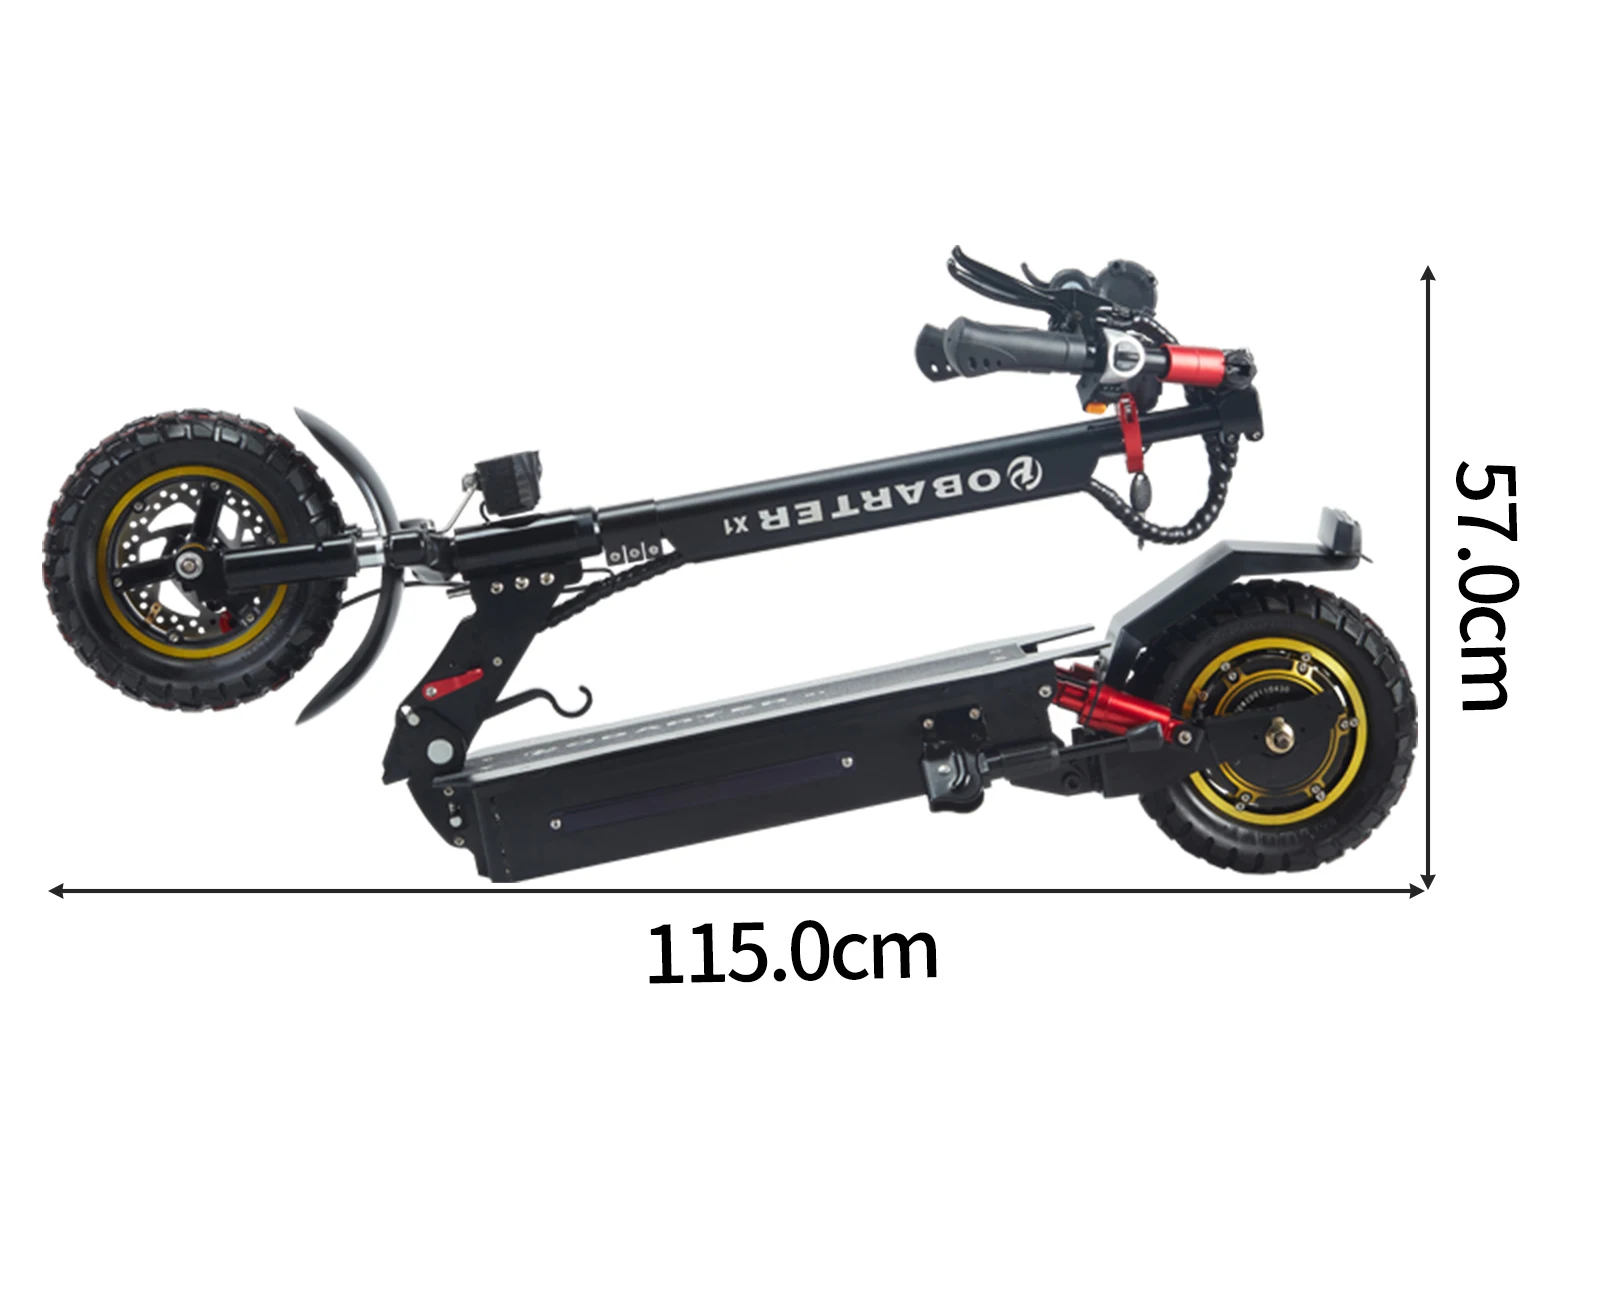 

Kewnuo X1 Powerful 1000w 48v single motor 10inch fat tire foldable Motor scooty scooter electric 1000w for adults